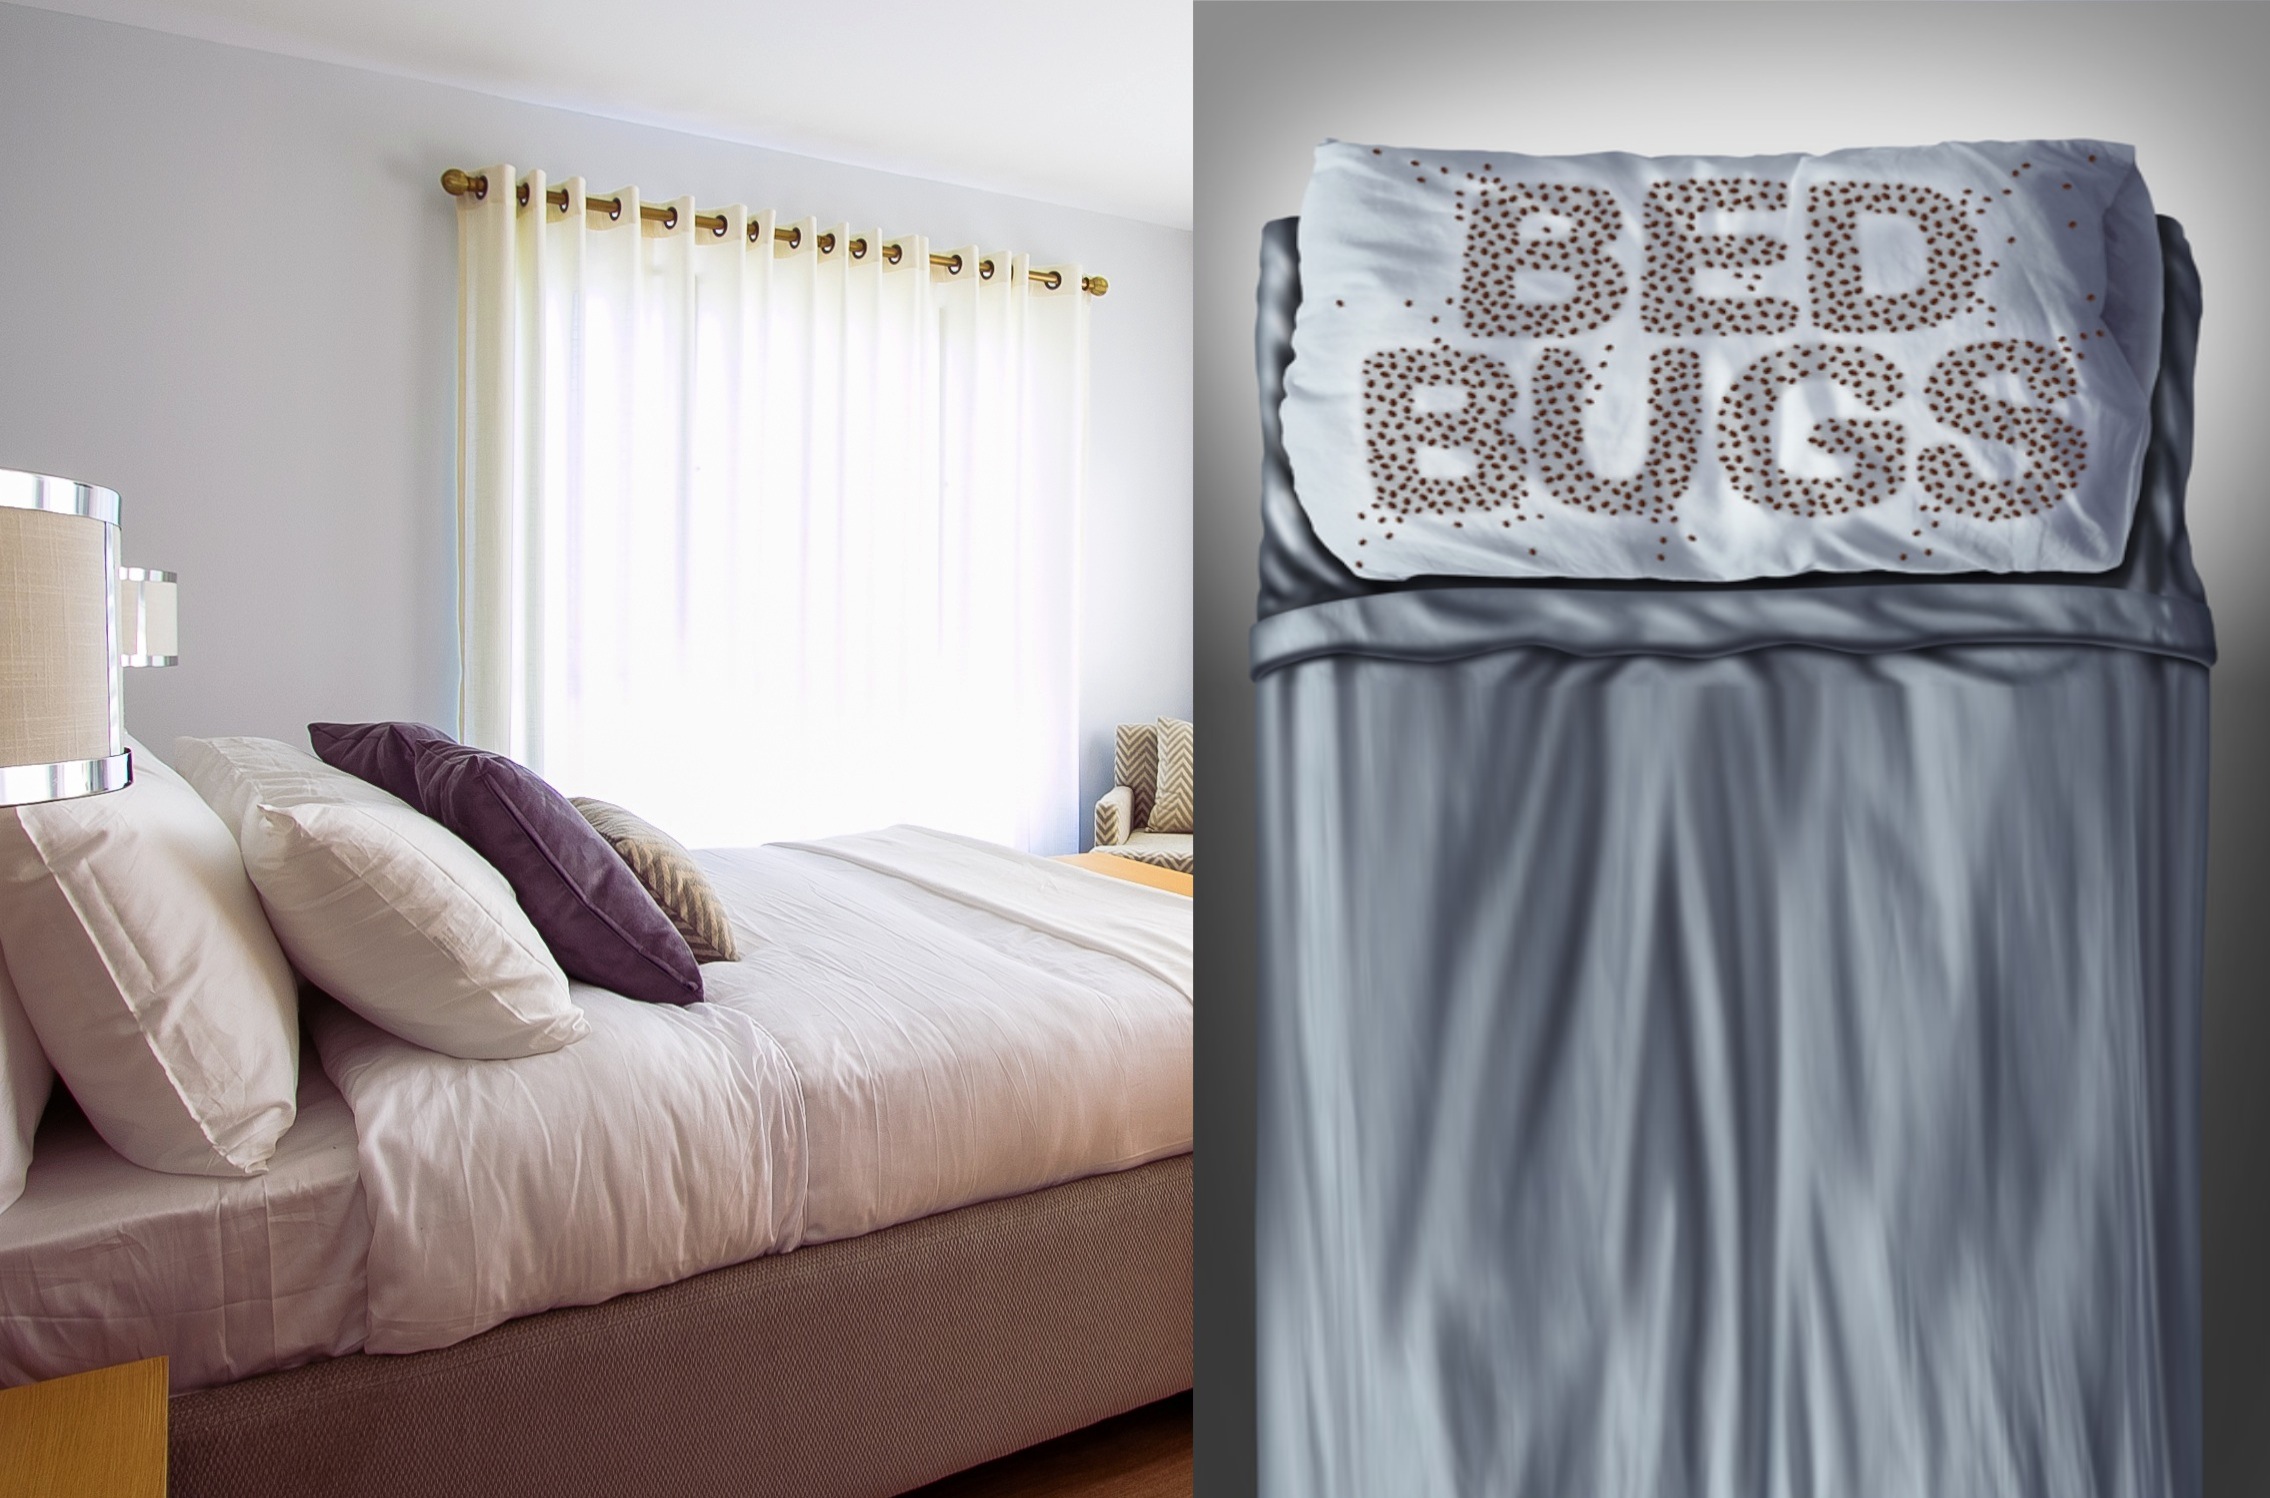 INFOGRAPHIC: Guide To Safe Bed Bug Mattress Disposal